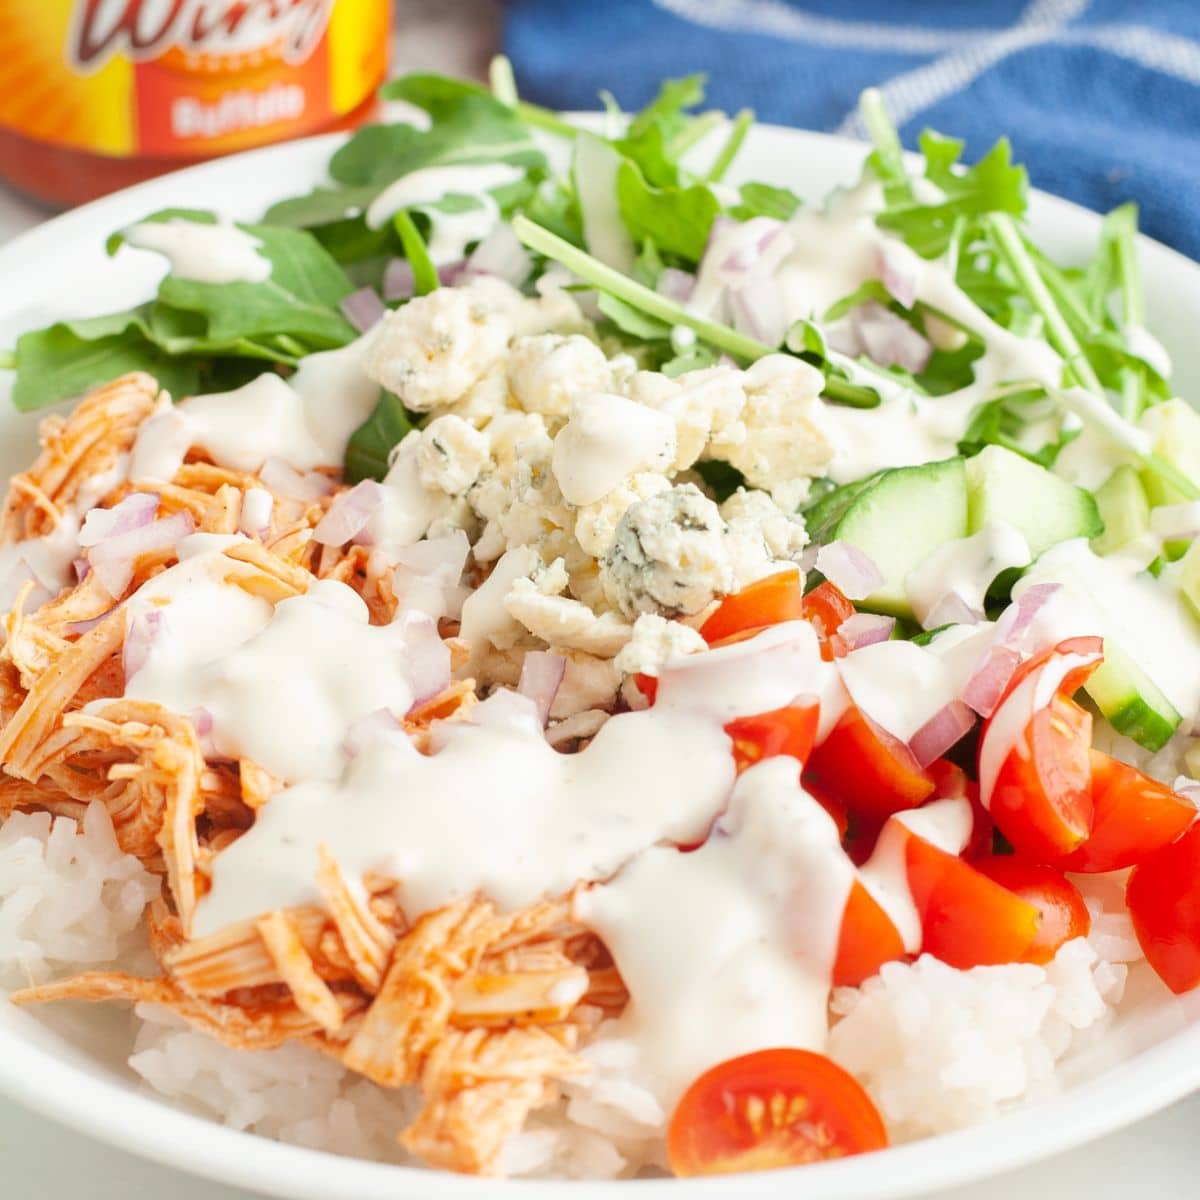 Shredded buffalo chicken, lettuce, tomatoes, with ranch. 